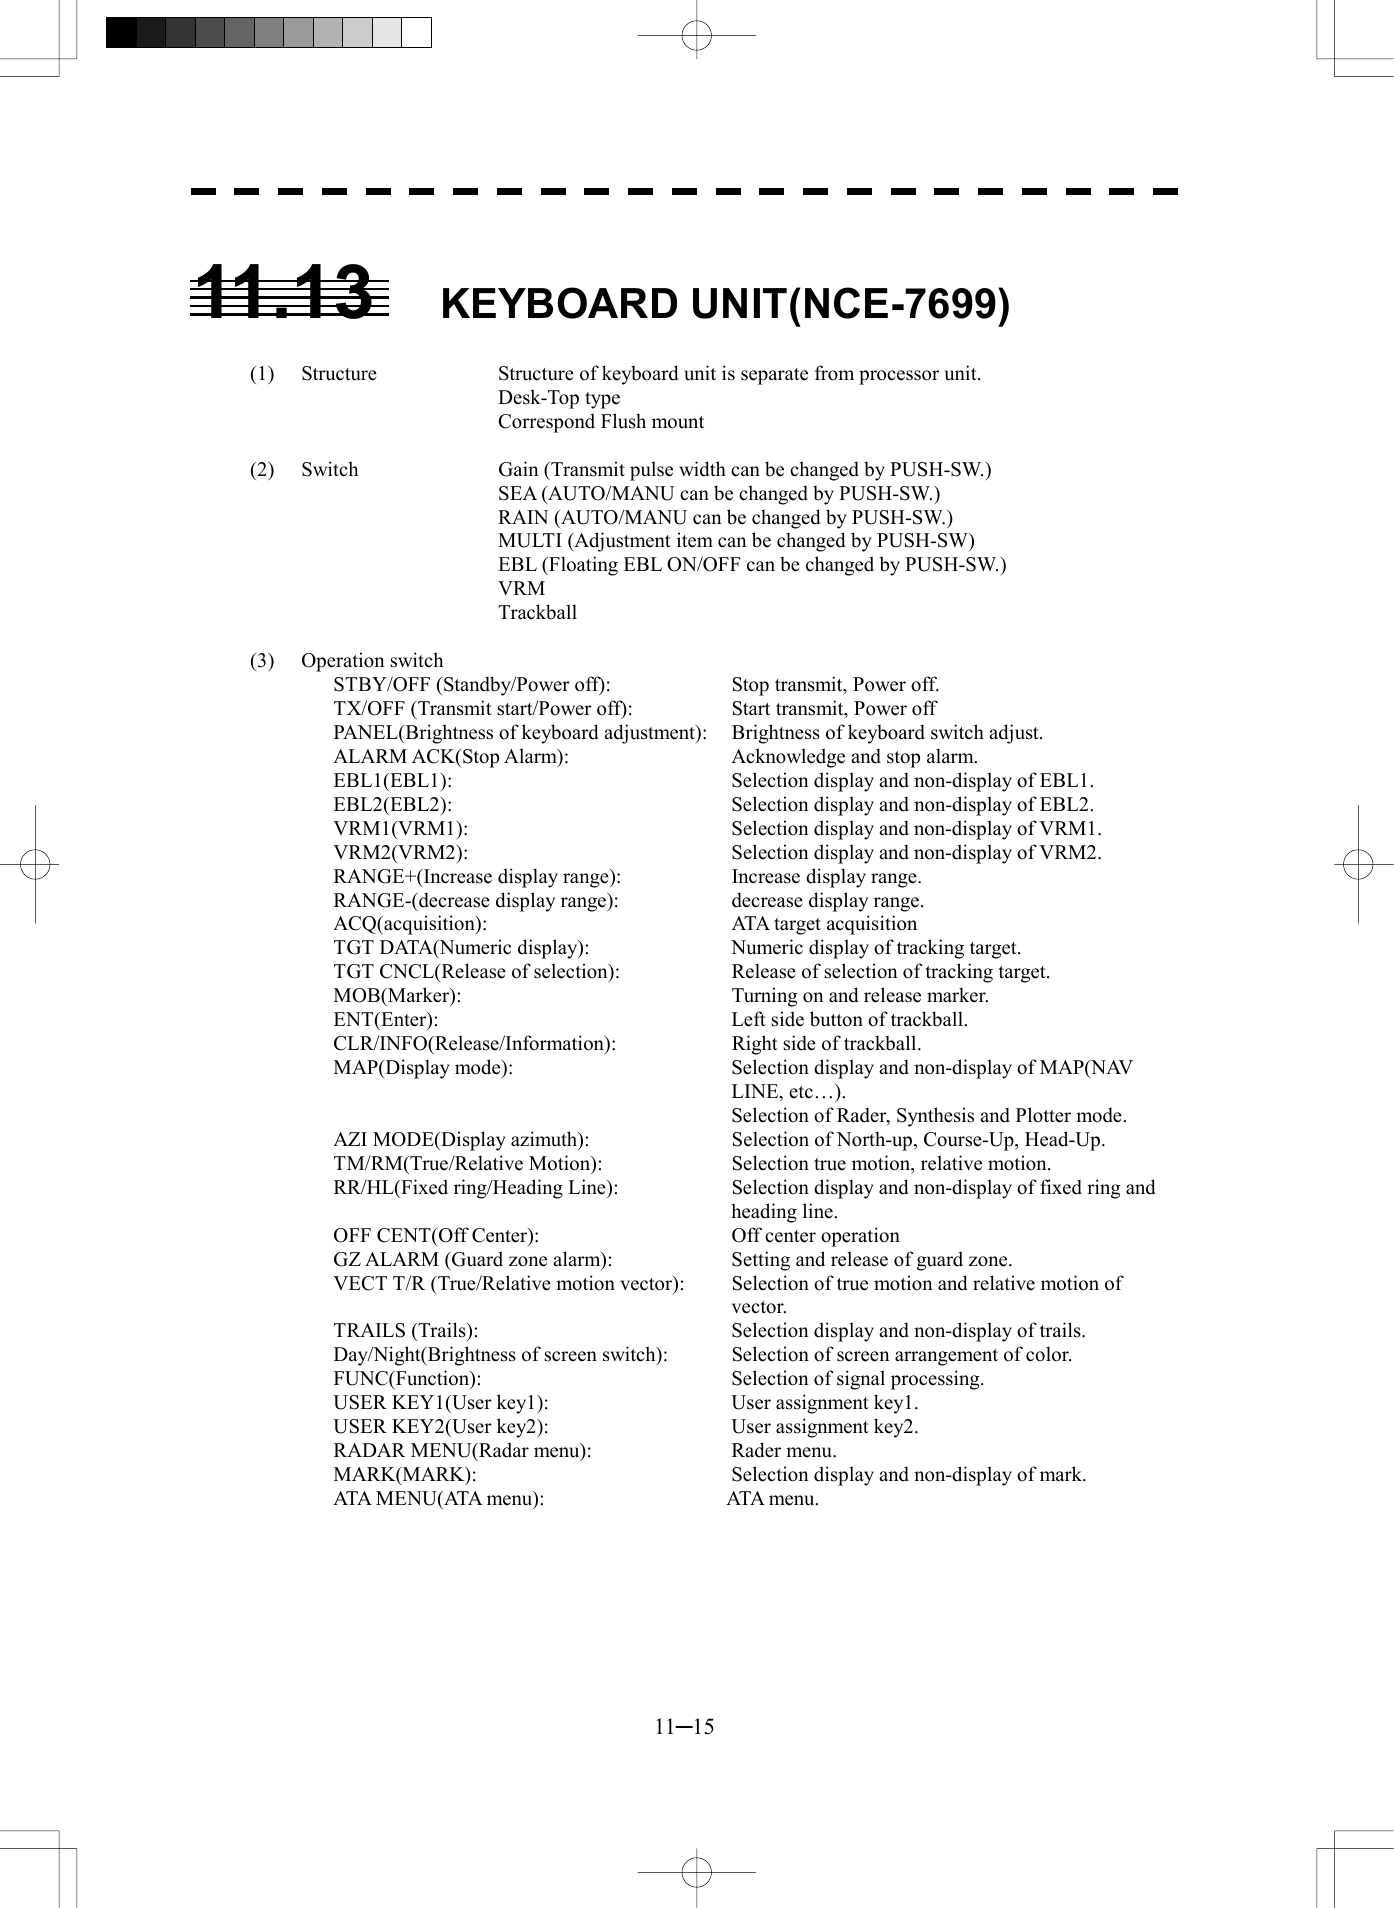  11─15  11.13 KEYBOARD UNIT(NCE-7699)  (1)  Structure  Structure of keyboard unit is separate from processor unit.    Desk-Top type     Correspond Flush mount    (2)  Switch  Gain (Transmit pulse width can be changed by PUSH-SW.)     SEA (AUTO/MANU can be changed by PUSH-SW.)     RAIN (AUTO/MANU can be changed by PUSH-SW.)     MULTI (Adjustment item can be changed by PUSH-SW)     EBL (Floating EBL ON/OFF can be changed by PUSH-SW.)    VRM    Trackball  (3) Operation switch STBY/OFF (Standby/Power off):    Stop transmit, Power off. TX/OFF (Transmit start/Power off):    Start transmit, Power off PANEL(Brightness of keyboard adjustment):  Brightness of keyboard switch adjust. ALARM ACK(Stop Alarm):    Acknowledge and stop alarm. EBL1(EBL1):    Selection display and non-display of EBL1. EBL2(EBL2):    Selection display and non-display of EBL2. VRM1(VRM1):    Selection display and non-display of VRM1. VRM2(VRM2):    Selection display and non-display of VRM2. RANGE+(Increase display range):    Increase display range. RANGE-(decrease display range):    decrease display range. ACQ(acquisition):    ATA target acquisition TGT DATA(Numeric display):    Numeric display of tracking target. TGT CNCL(Release of selection):    Release of selection of tracking target. MOB(Marker):    Turning on and release marker. ENT(Enter):    Left side button of trackball. CLR/INFO(Release/Information):    Right side of trackball. MAP(Display mode):  Selection display and non-display of MAP(NAV LINE, etc…).   Selection of Rader, Synthesis and Plotter mode. AZI MODE(Display azimuth):    Selection of North-up, Course-Up, Head-Up. TM/RM(True/Relative Motion):    Selection true motion, relative motion. RR/HL(Fixed ring/Heading Line):  Selection display and non-display of fixed ring and heading line. OFF CENT(Off Center):  Off center operation GZ ALARM (Guard zone alarm):    Setting and release of guard zone. VECT T/R (True/Relative motion vector):  Selection of true motion and relative motion of vector. TRAILS (Trails):    Selection display and non-display of trails. Day/Night(Brightness of screen switch):  Selection of screen arrangement of color. FUNC(Function):  Selection of signal processing. USER KEY1(User key1):    User assignment key1. USER KEY2(User key2):    User assignment key2. RADAR MENU(Radar menu):    Rader menu. MARK(MARK):    Selection display and non-display of mark. ATA M E N U ( ATA m e n u ) :         ATA me n u.